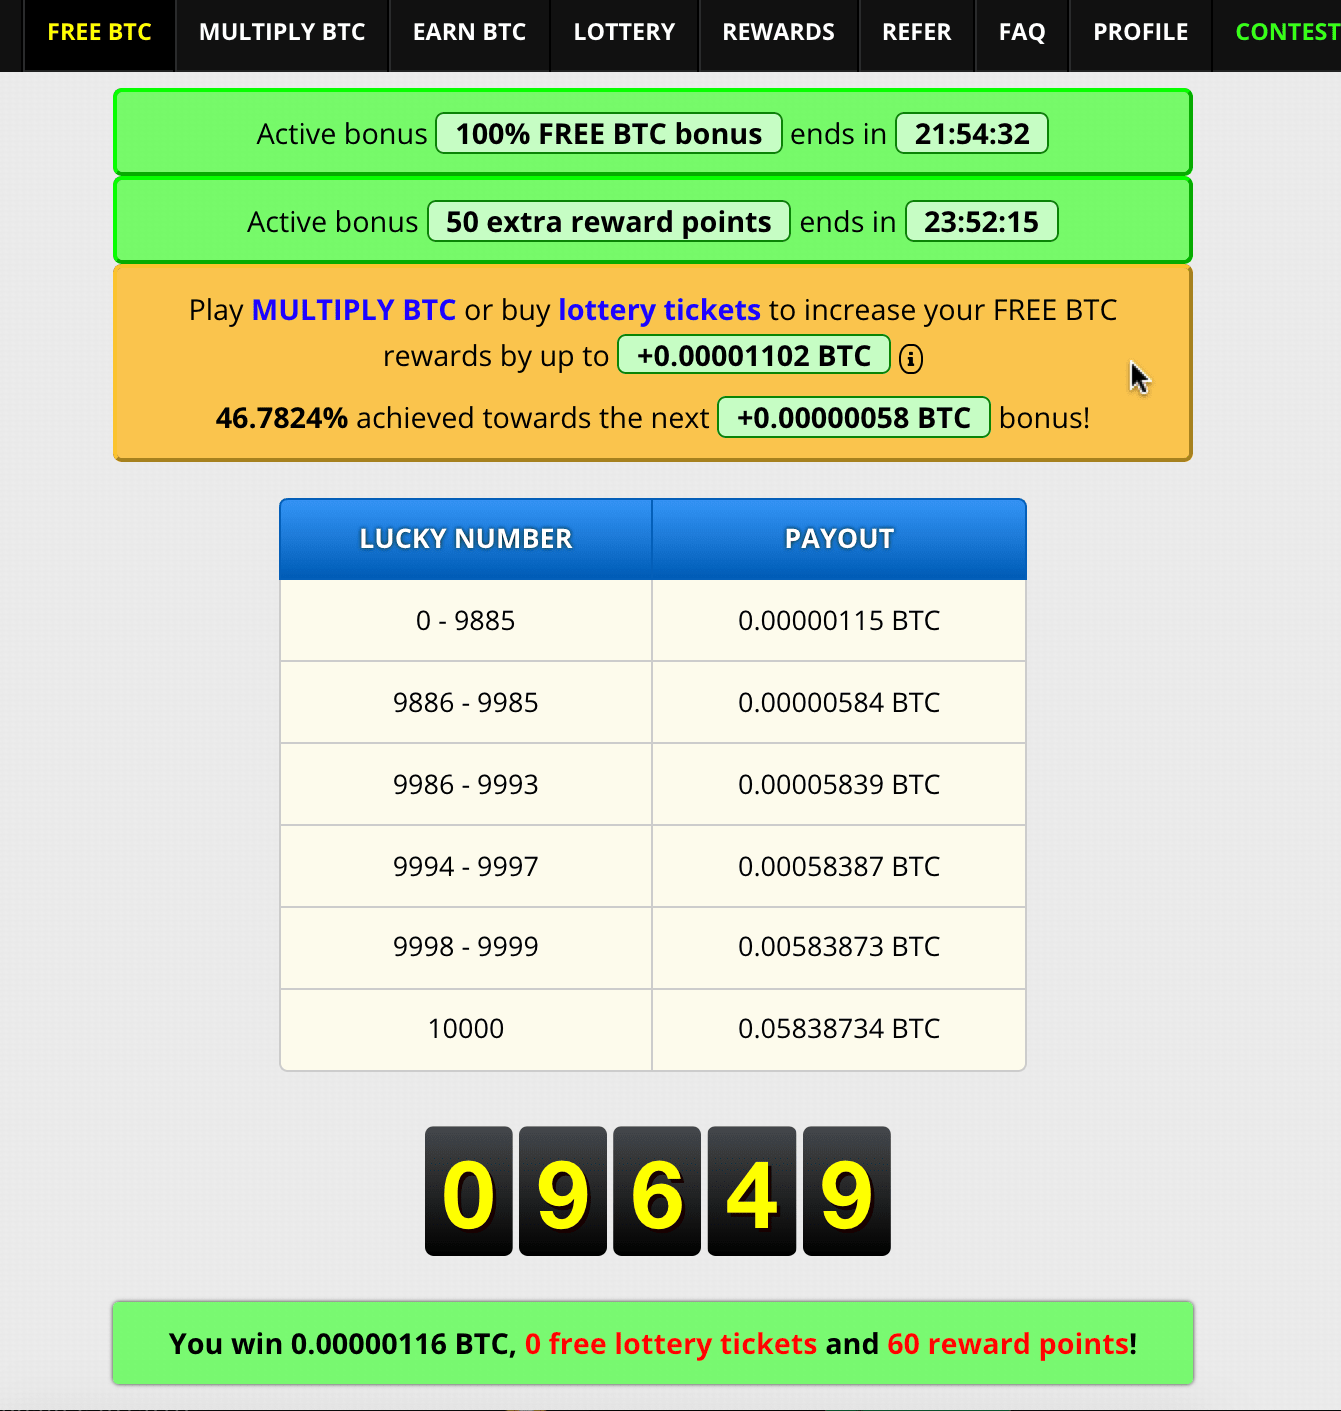 free bitcoin roll of 09649 and receiving a win of 0.00000116 btc